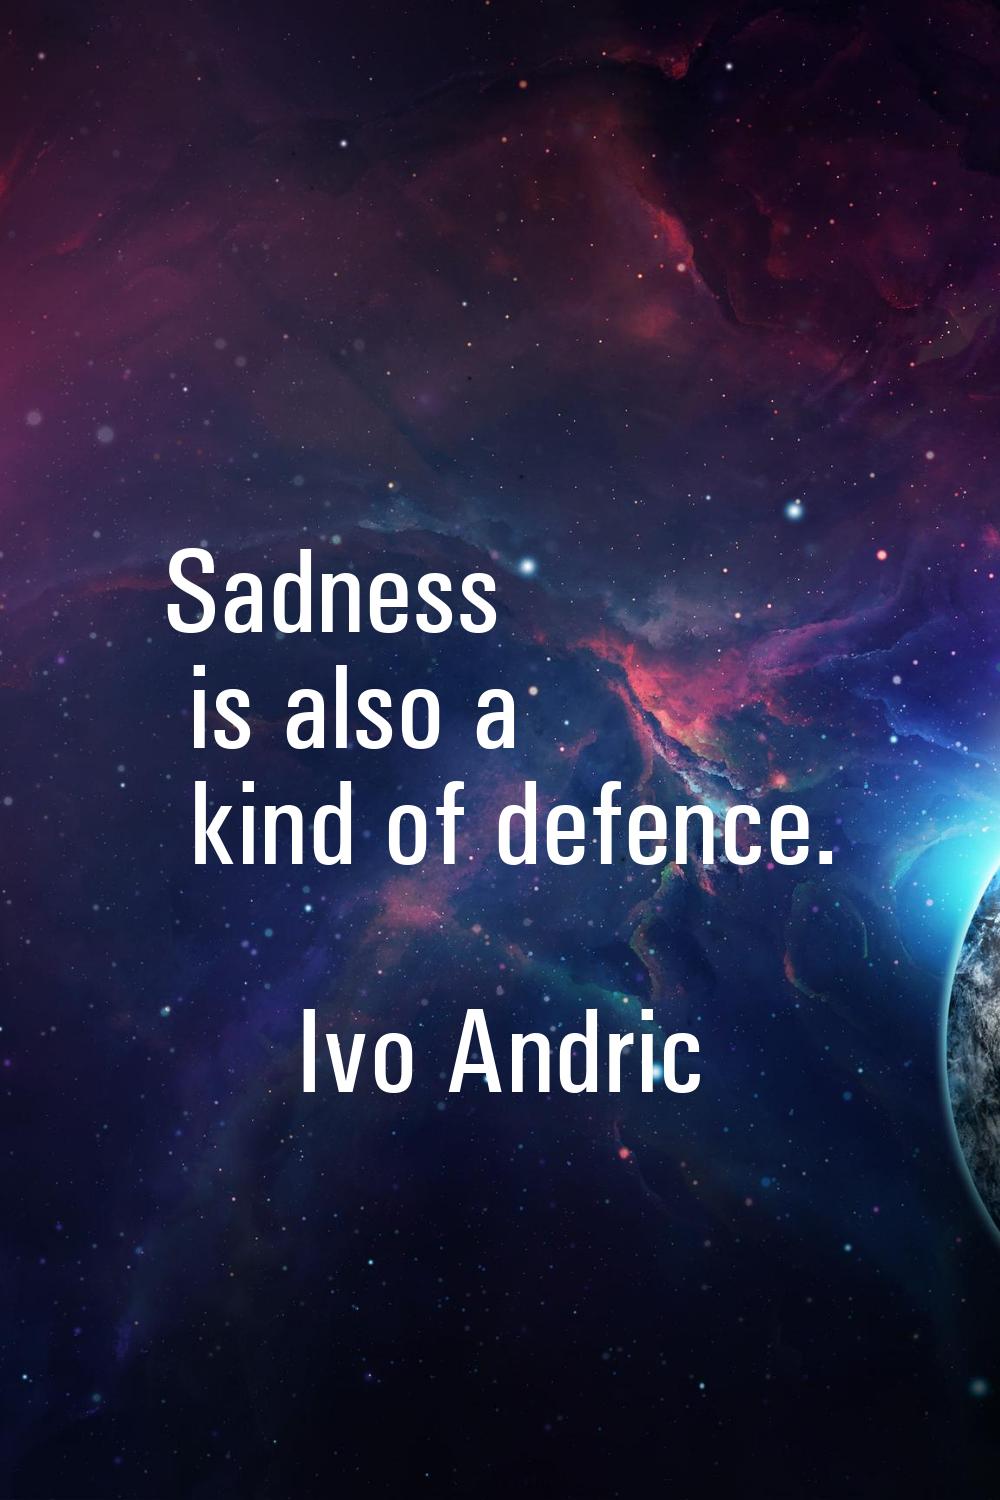 Sadness is also a kind of defence.